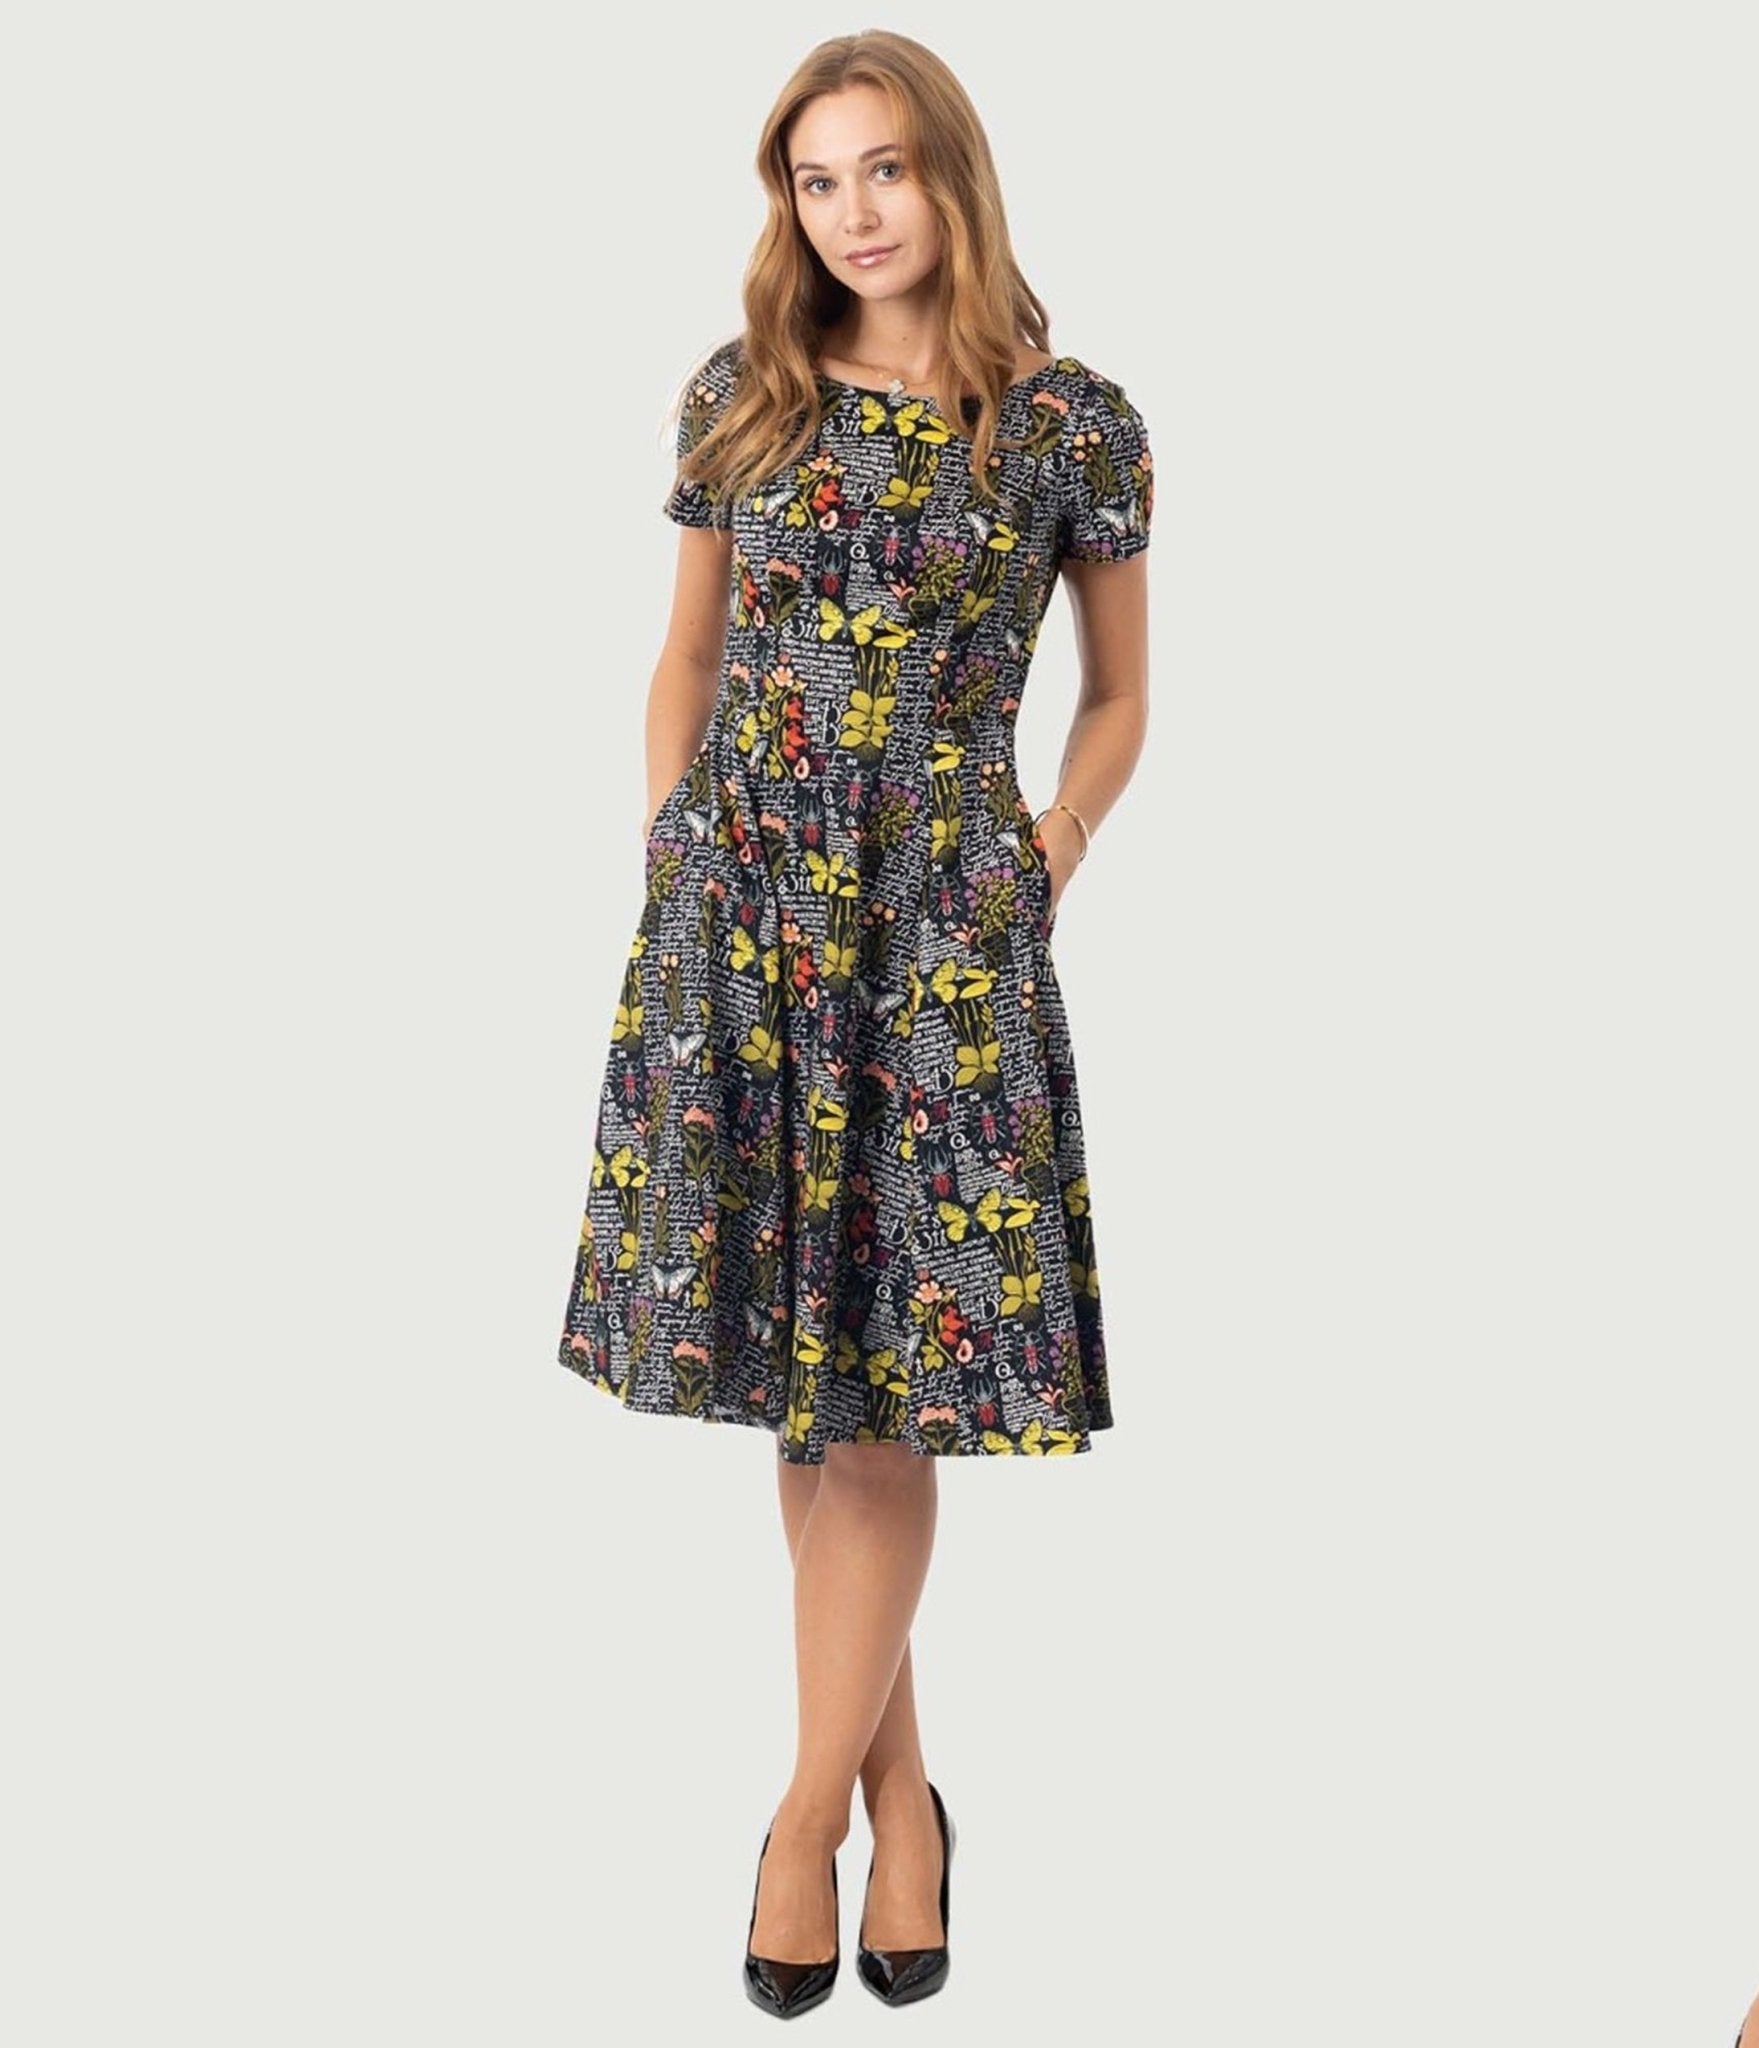 Black & Botanical Butterfly Print Swing Dress - Unique Vintage - Womens, DRESSES, FIT AND FLARE